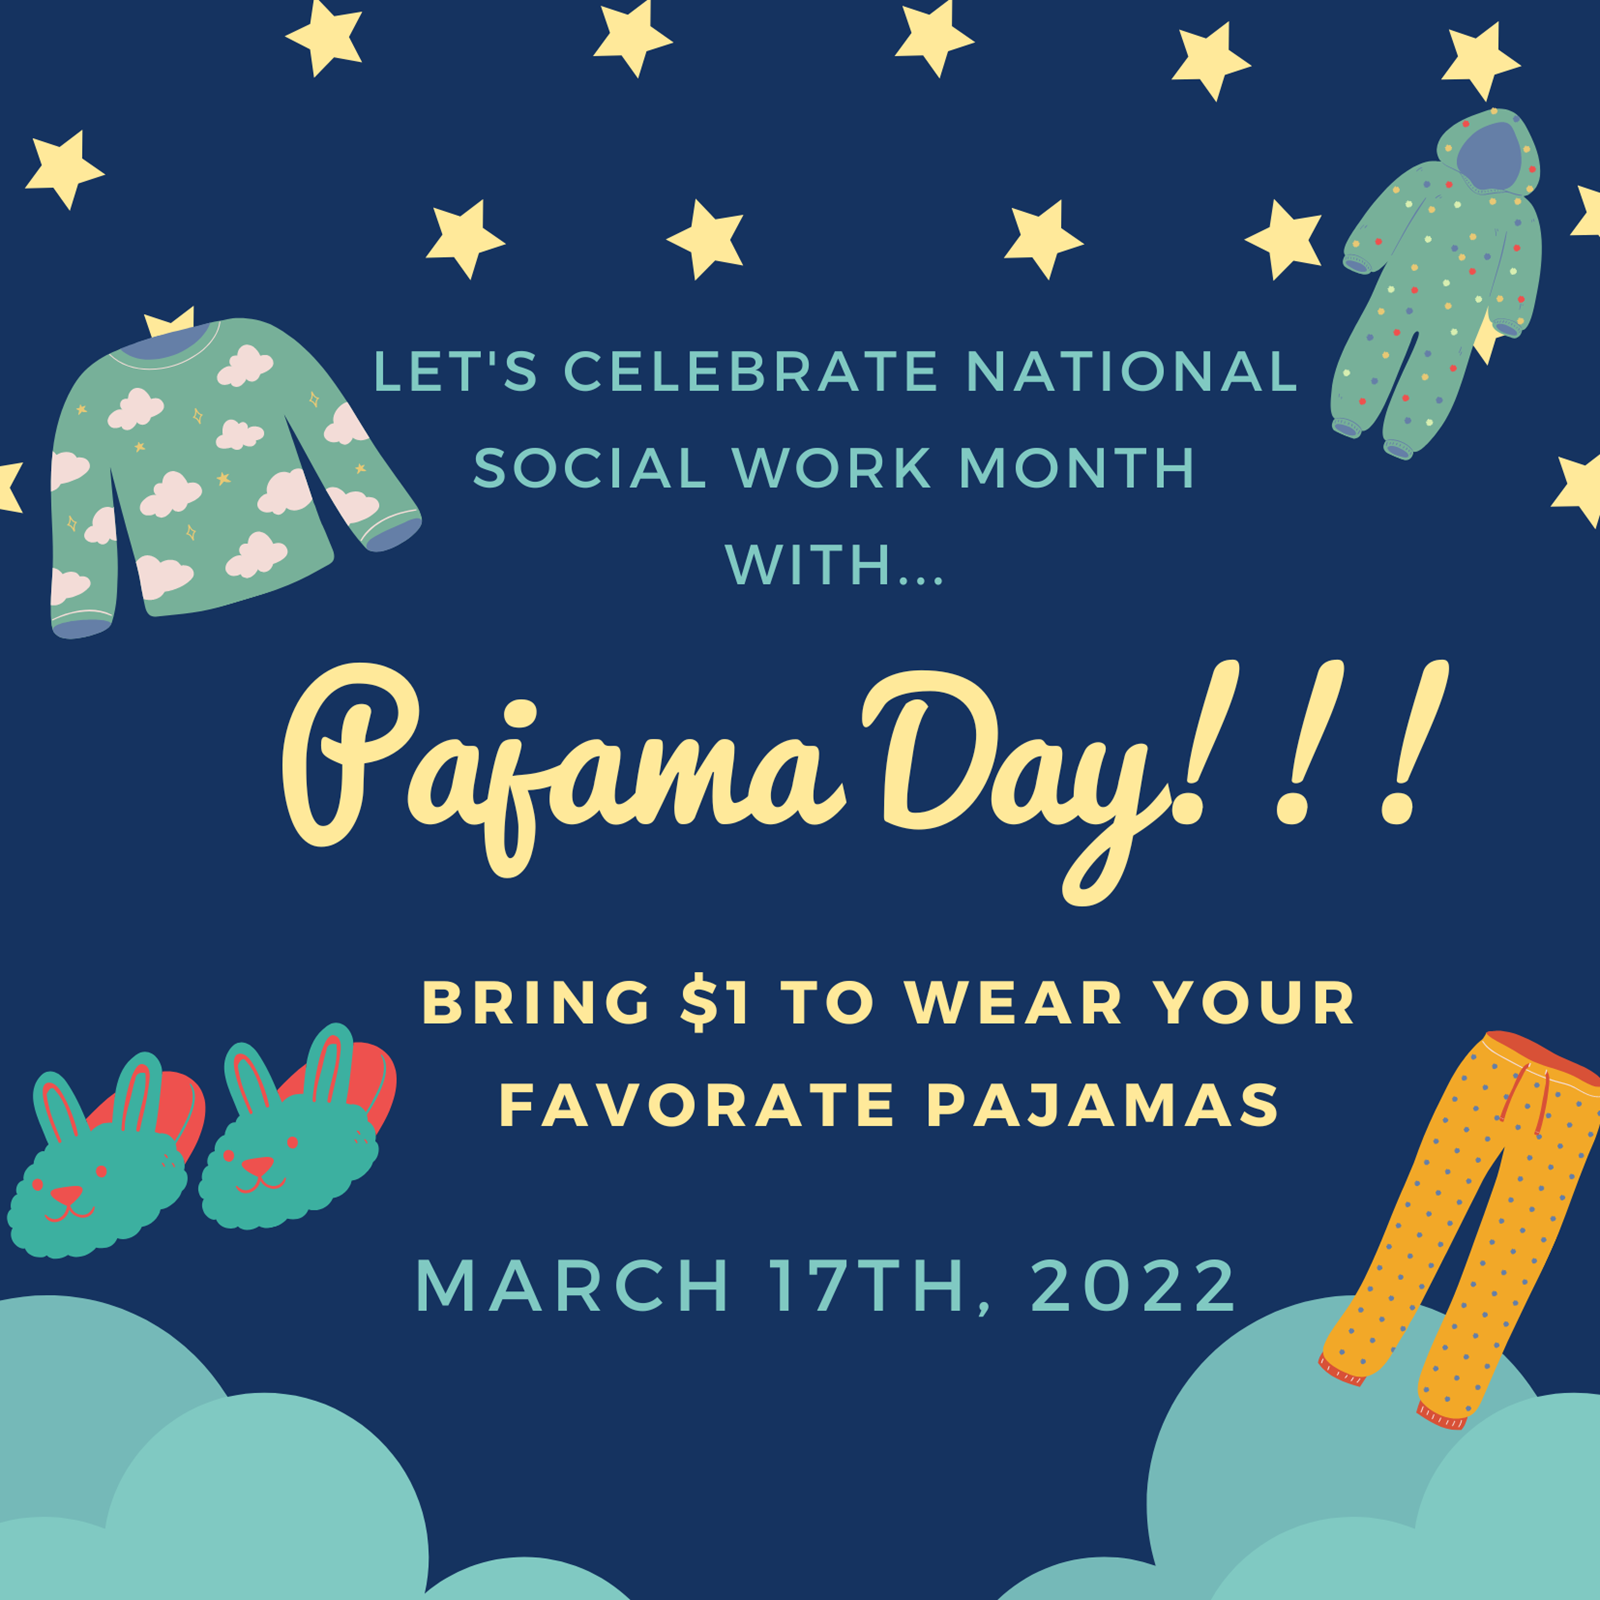 Pajama%20Day%20Flyer%20March%2017th_Mableton%20ENG-2.png